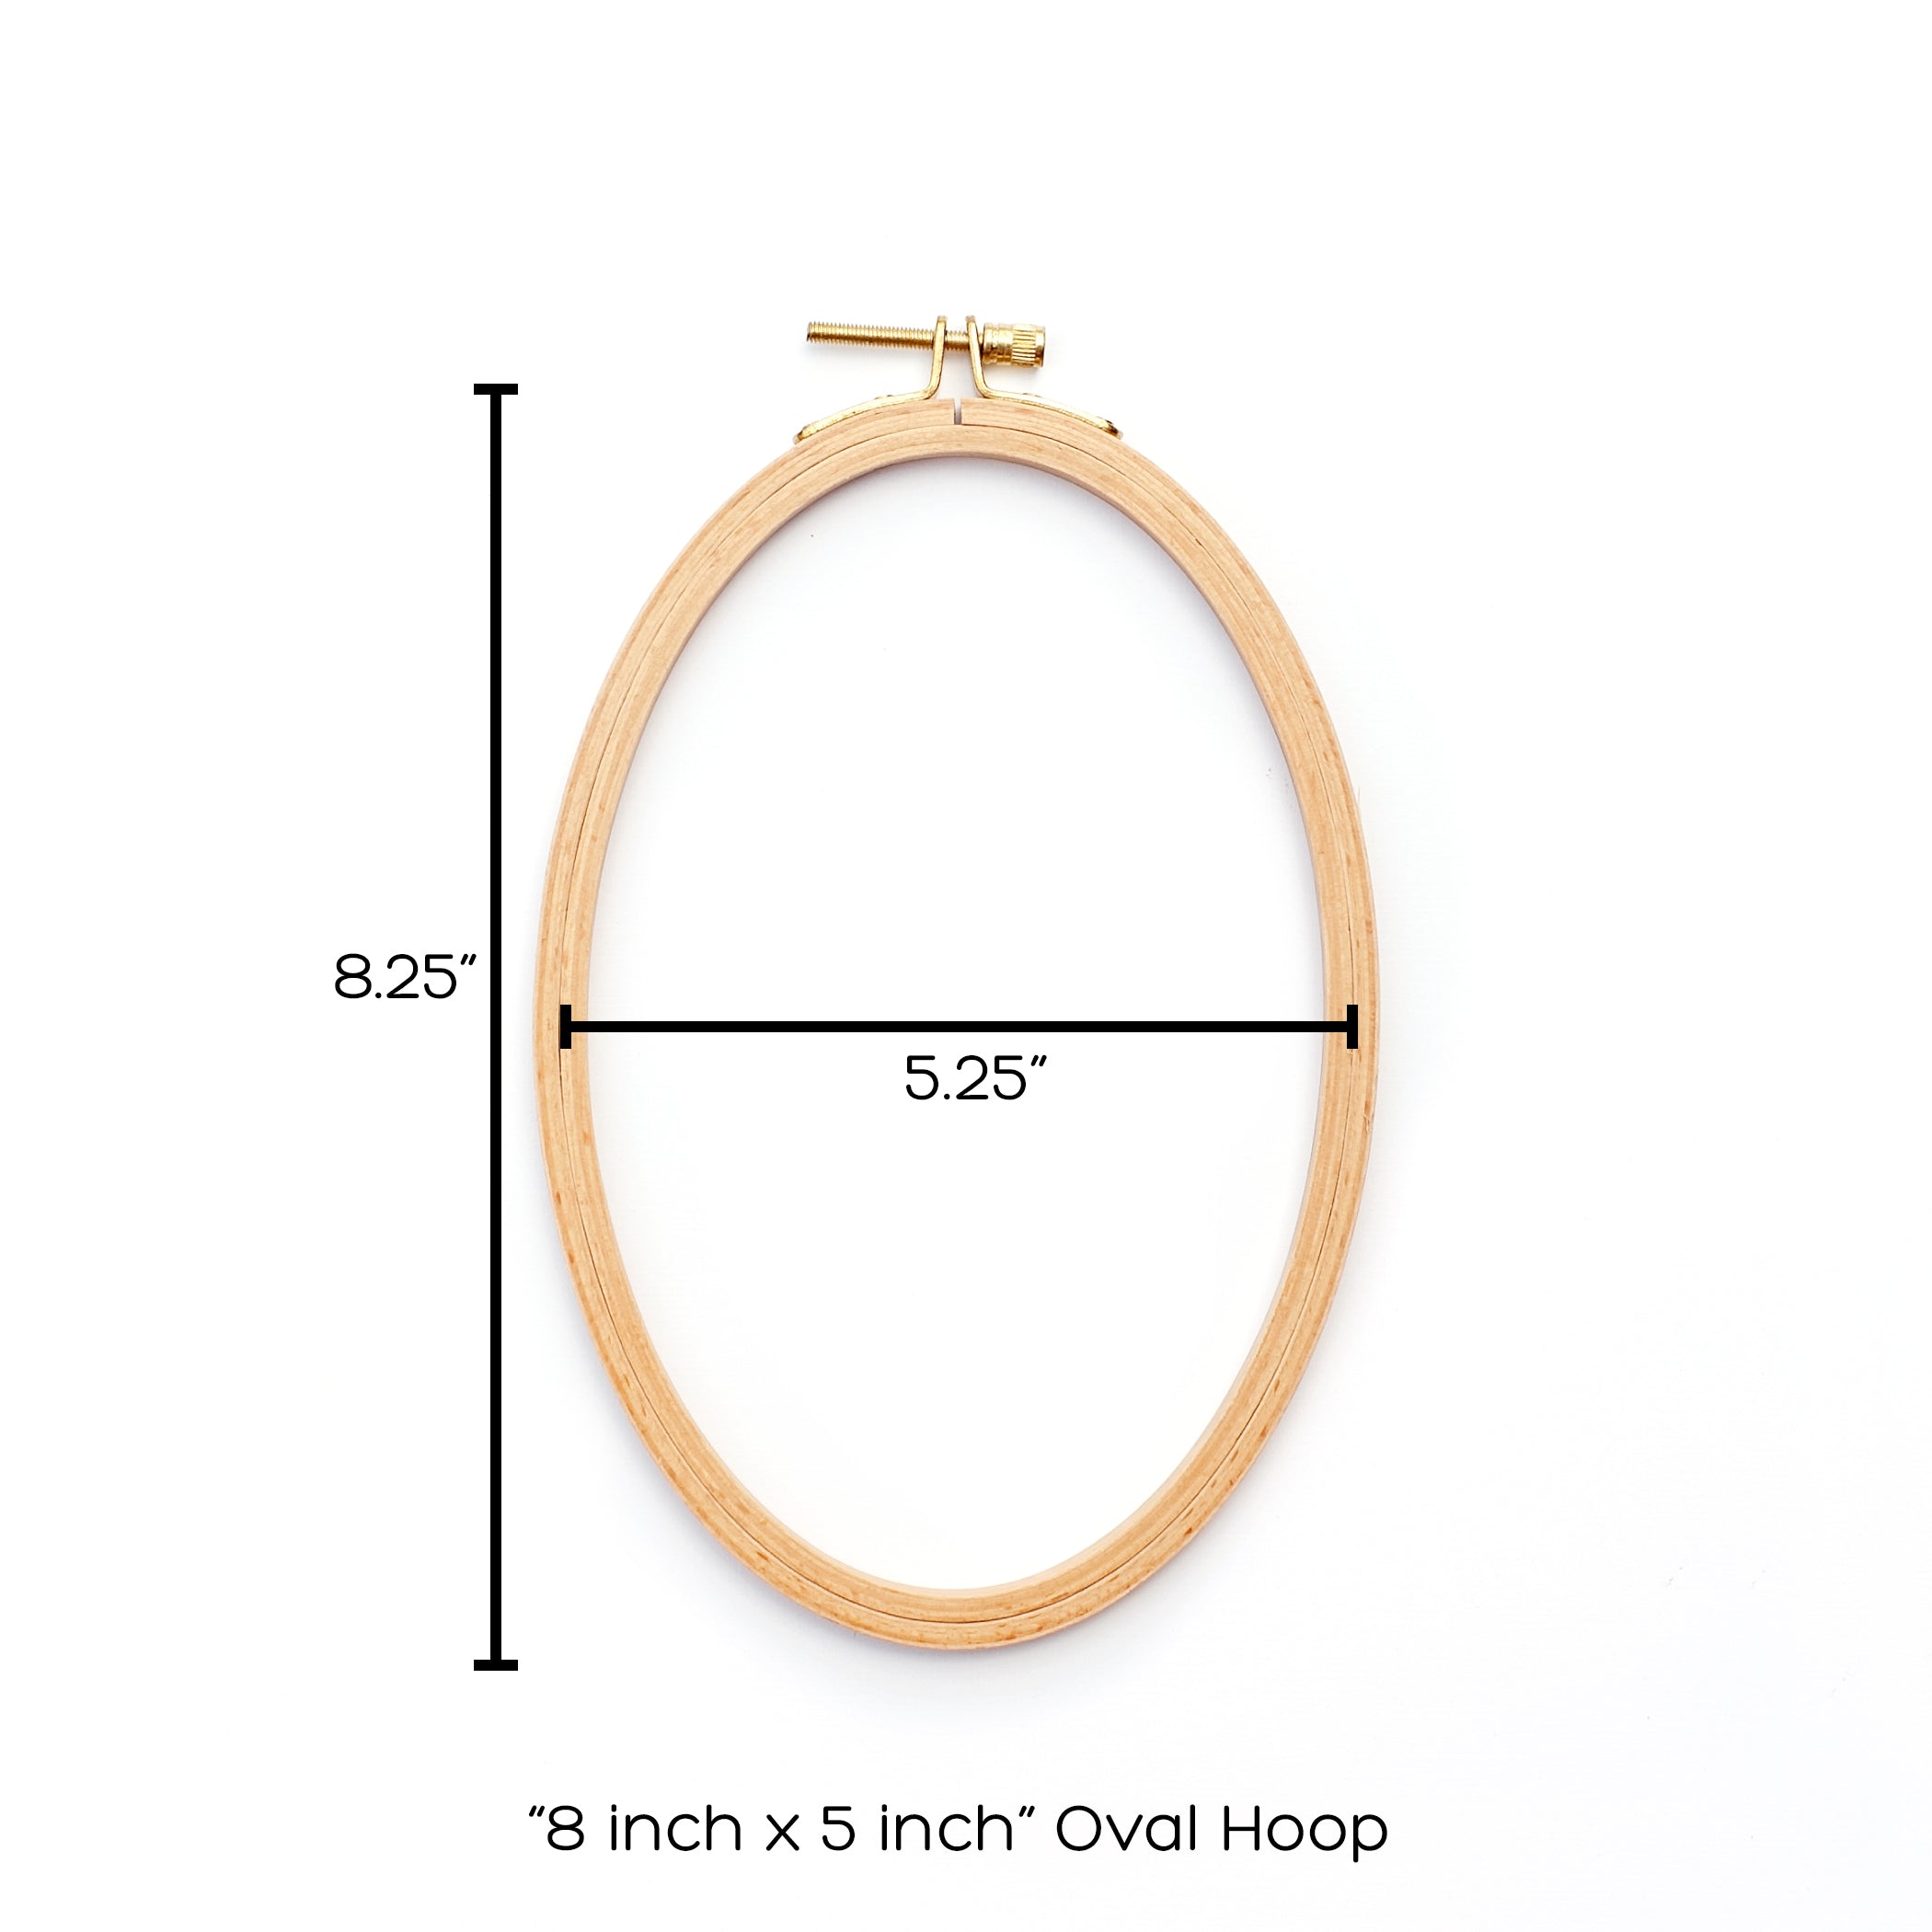  MUFEKUM 3 Pcs 3 Sizes Beechwood Embroidery Hoops, Cross Stitch  Hoop Wooden Circle for Embroidery, Cross Stitch, Needlework, Art Craft  Sewing and Hanging, Wedding Wreath Decoration (4”,6”,8”)